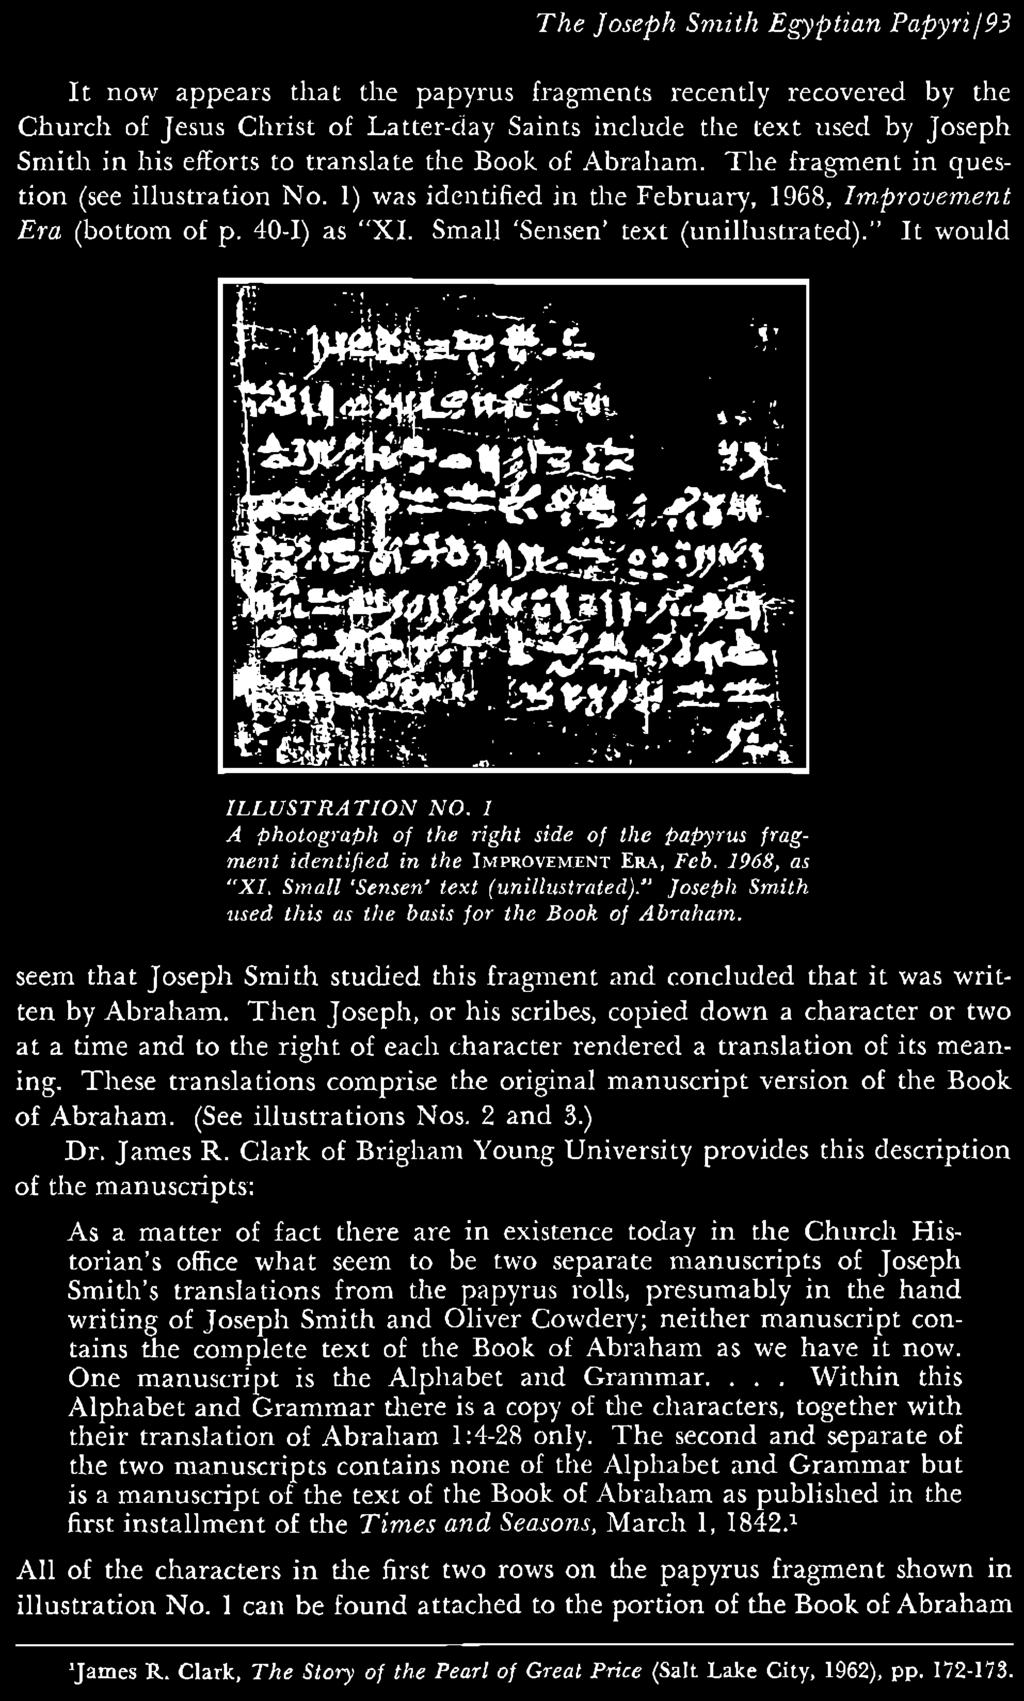 Abraham as we have it now. One manuscript is the Alphabet and Grammar.... Within this Alphabet and Grammar there is a copy of the characters, together with their translation of Abraham 1:4-28 only.